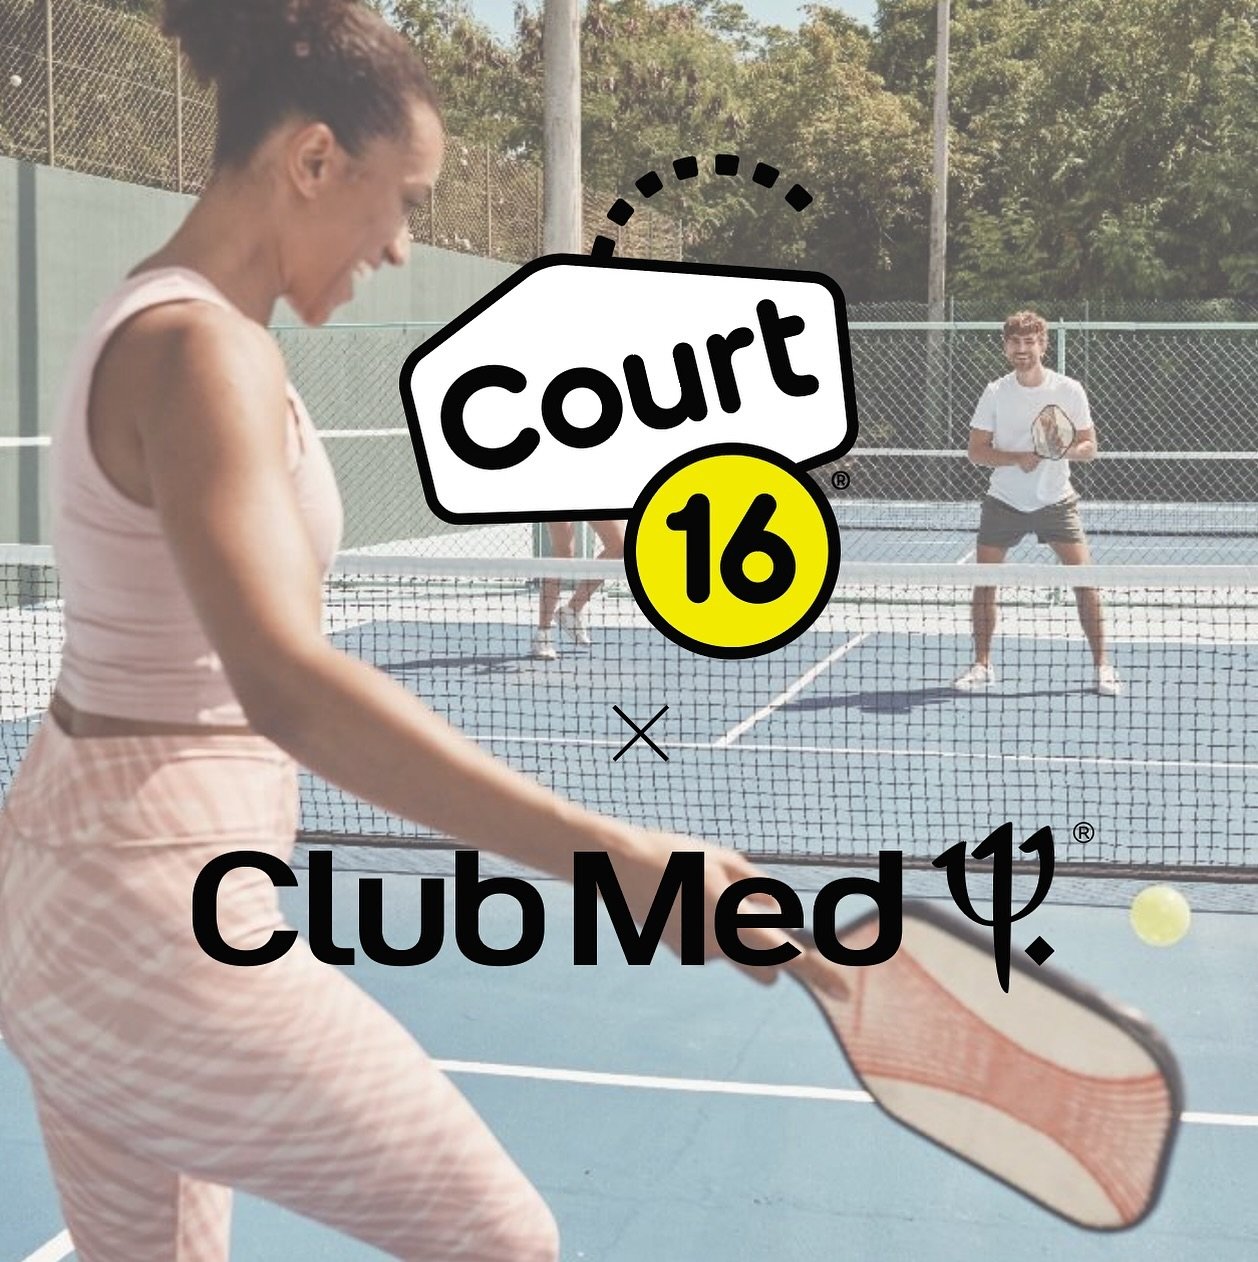 Forget the concrete jungle, your game&rsquo;s going global 🌍 We&rsquo;re thrilled to partner with all-inclusive pioneer @clubmed , bringing you the ultimate tennis and pickleball experience around the world!  Relax and rally at Club Med North Americ